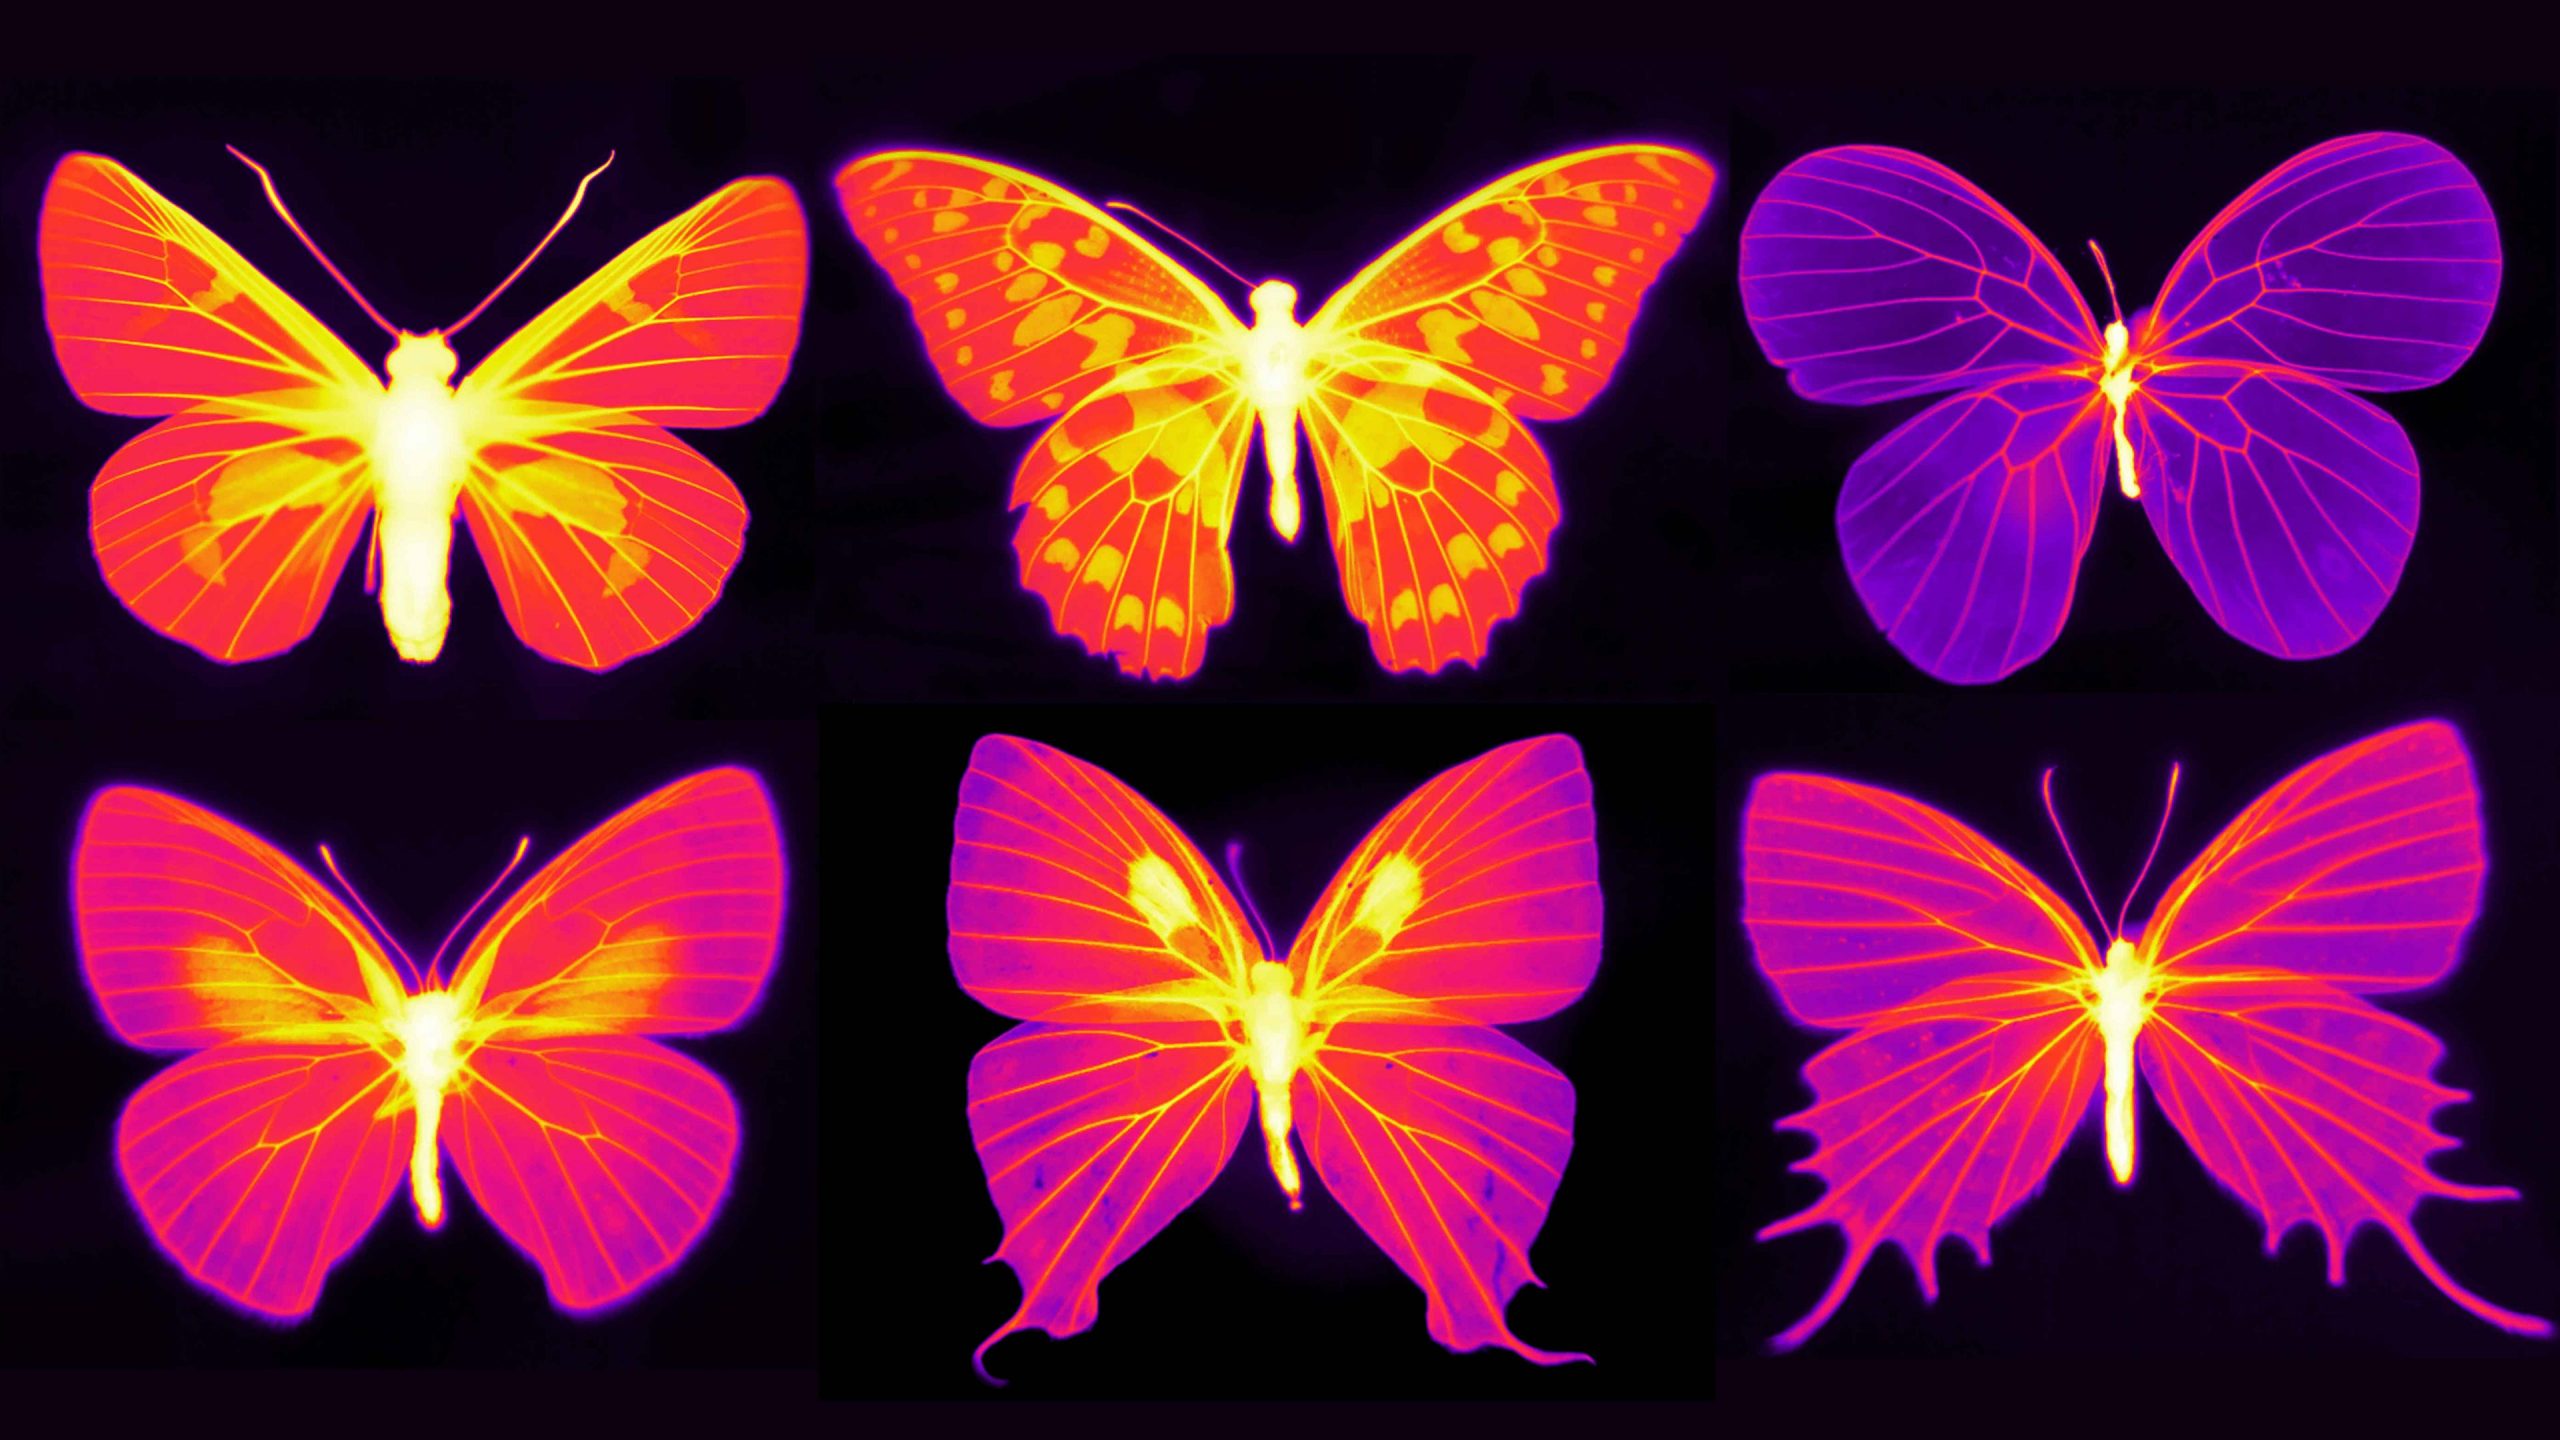 Nanostructures And Living Cells In Butterfly Wings Could Inspire Radiative Cooling Materials